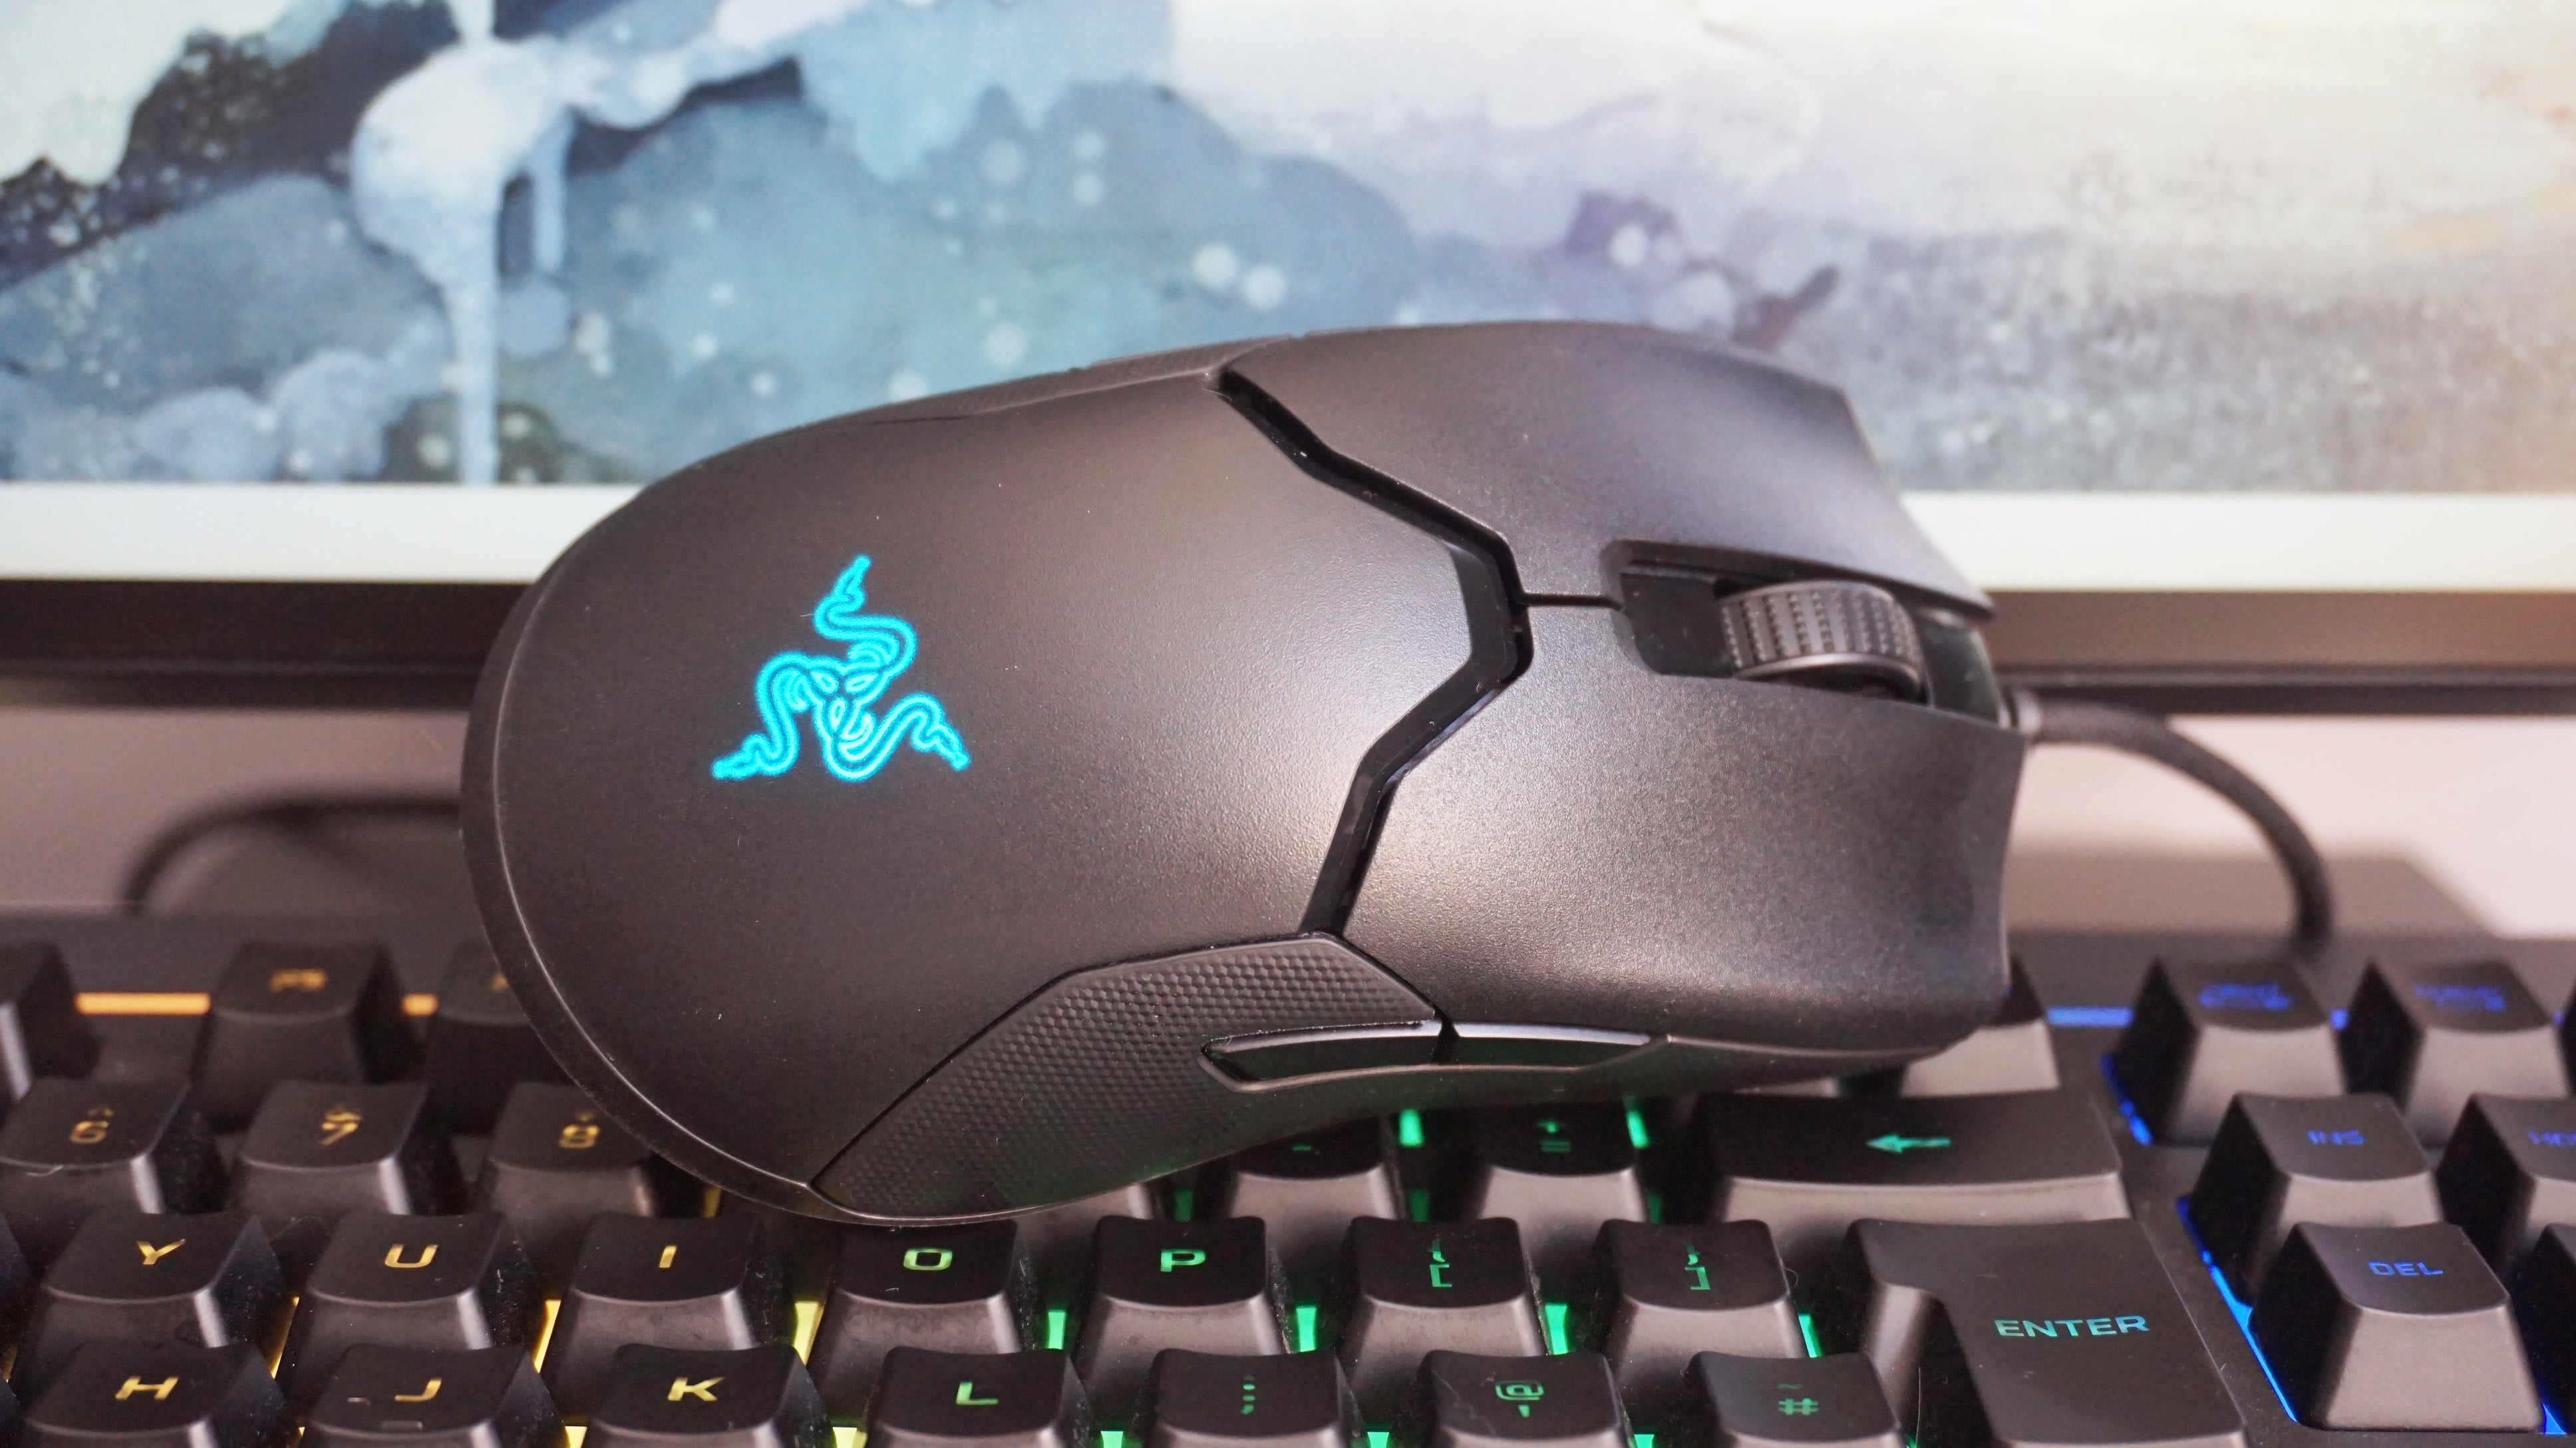 Image for Get up to 50% off Razer mice, headsets, keyboards and laptops before Prime Day ends at midnight